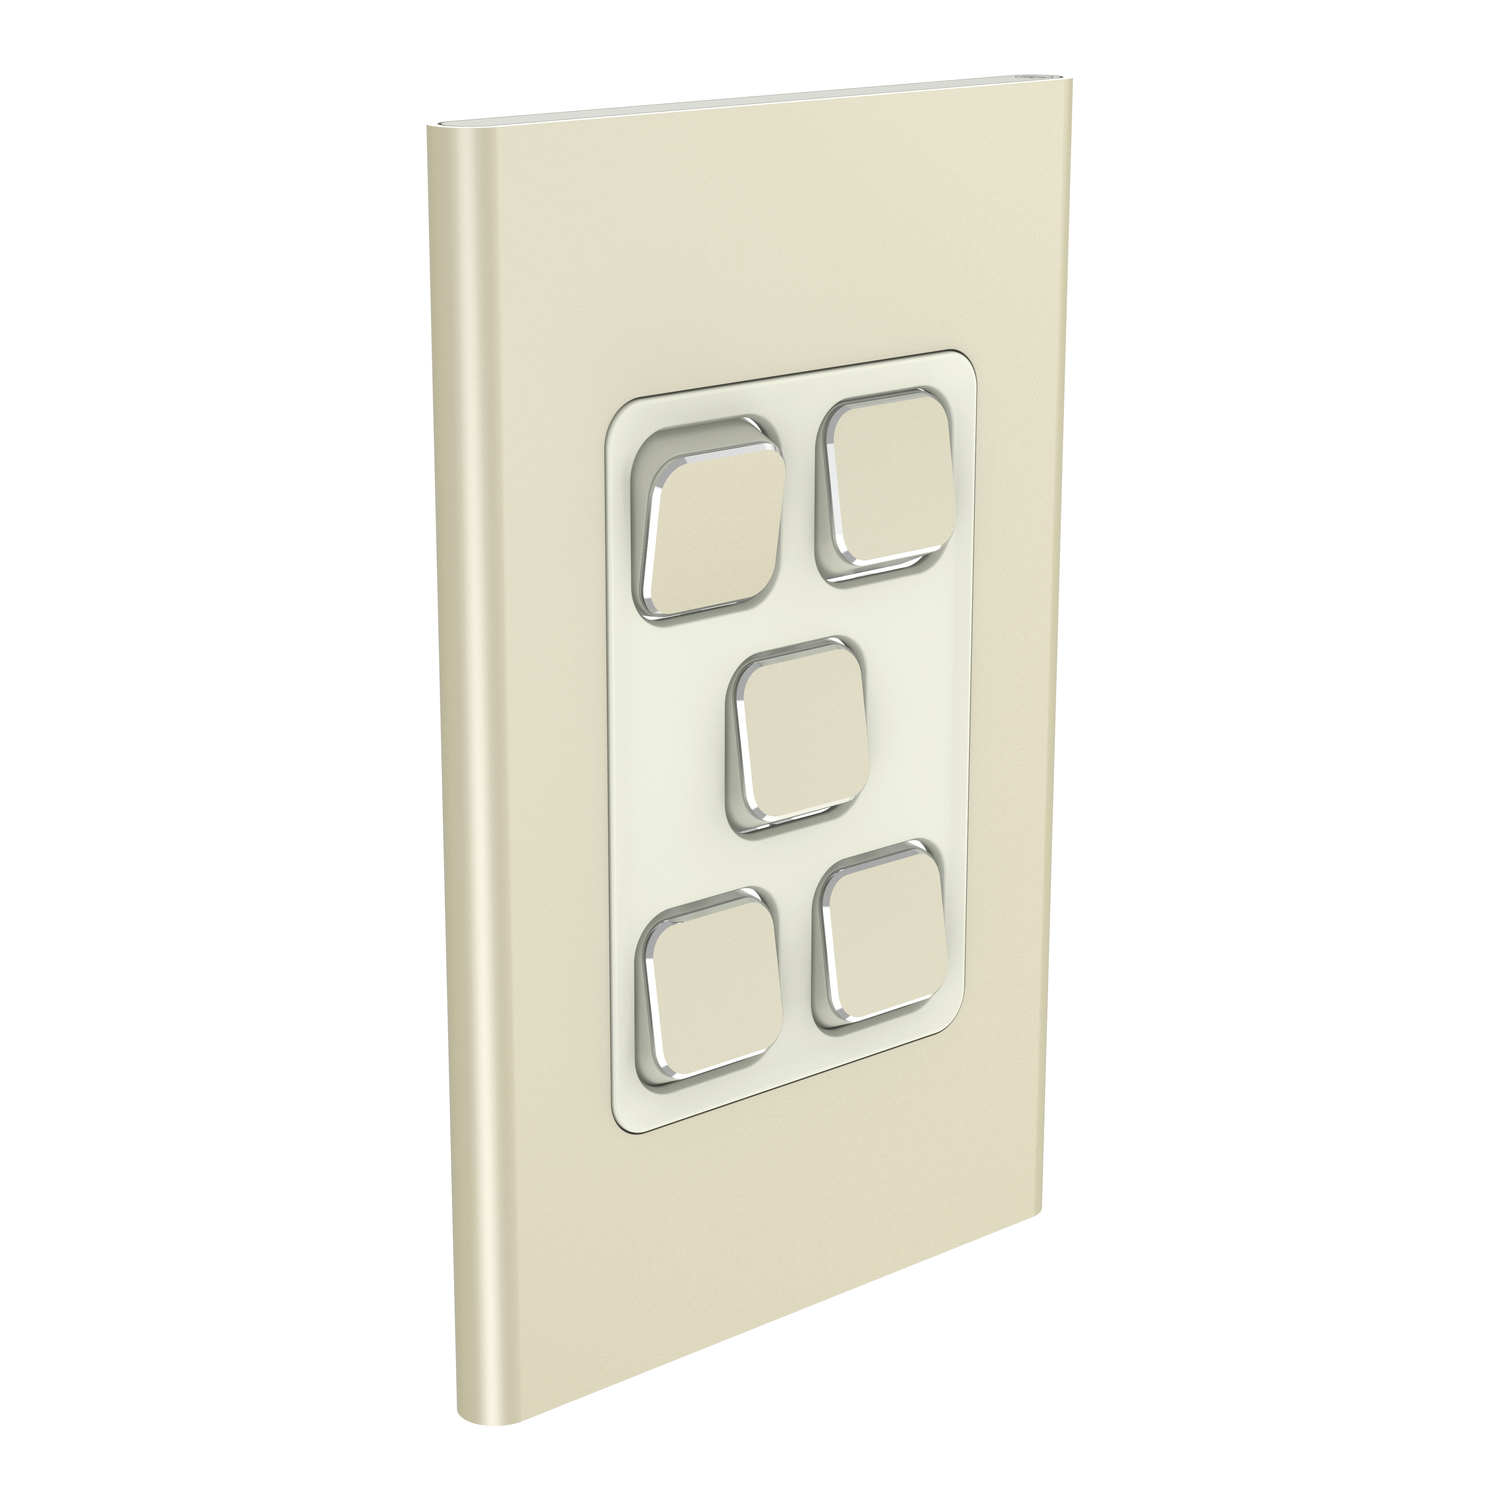 PDL Iconic Styl - Cover Plate Switch 5-Gang - Crowne